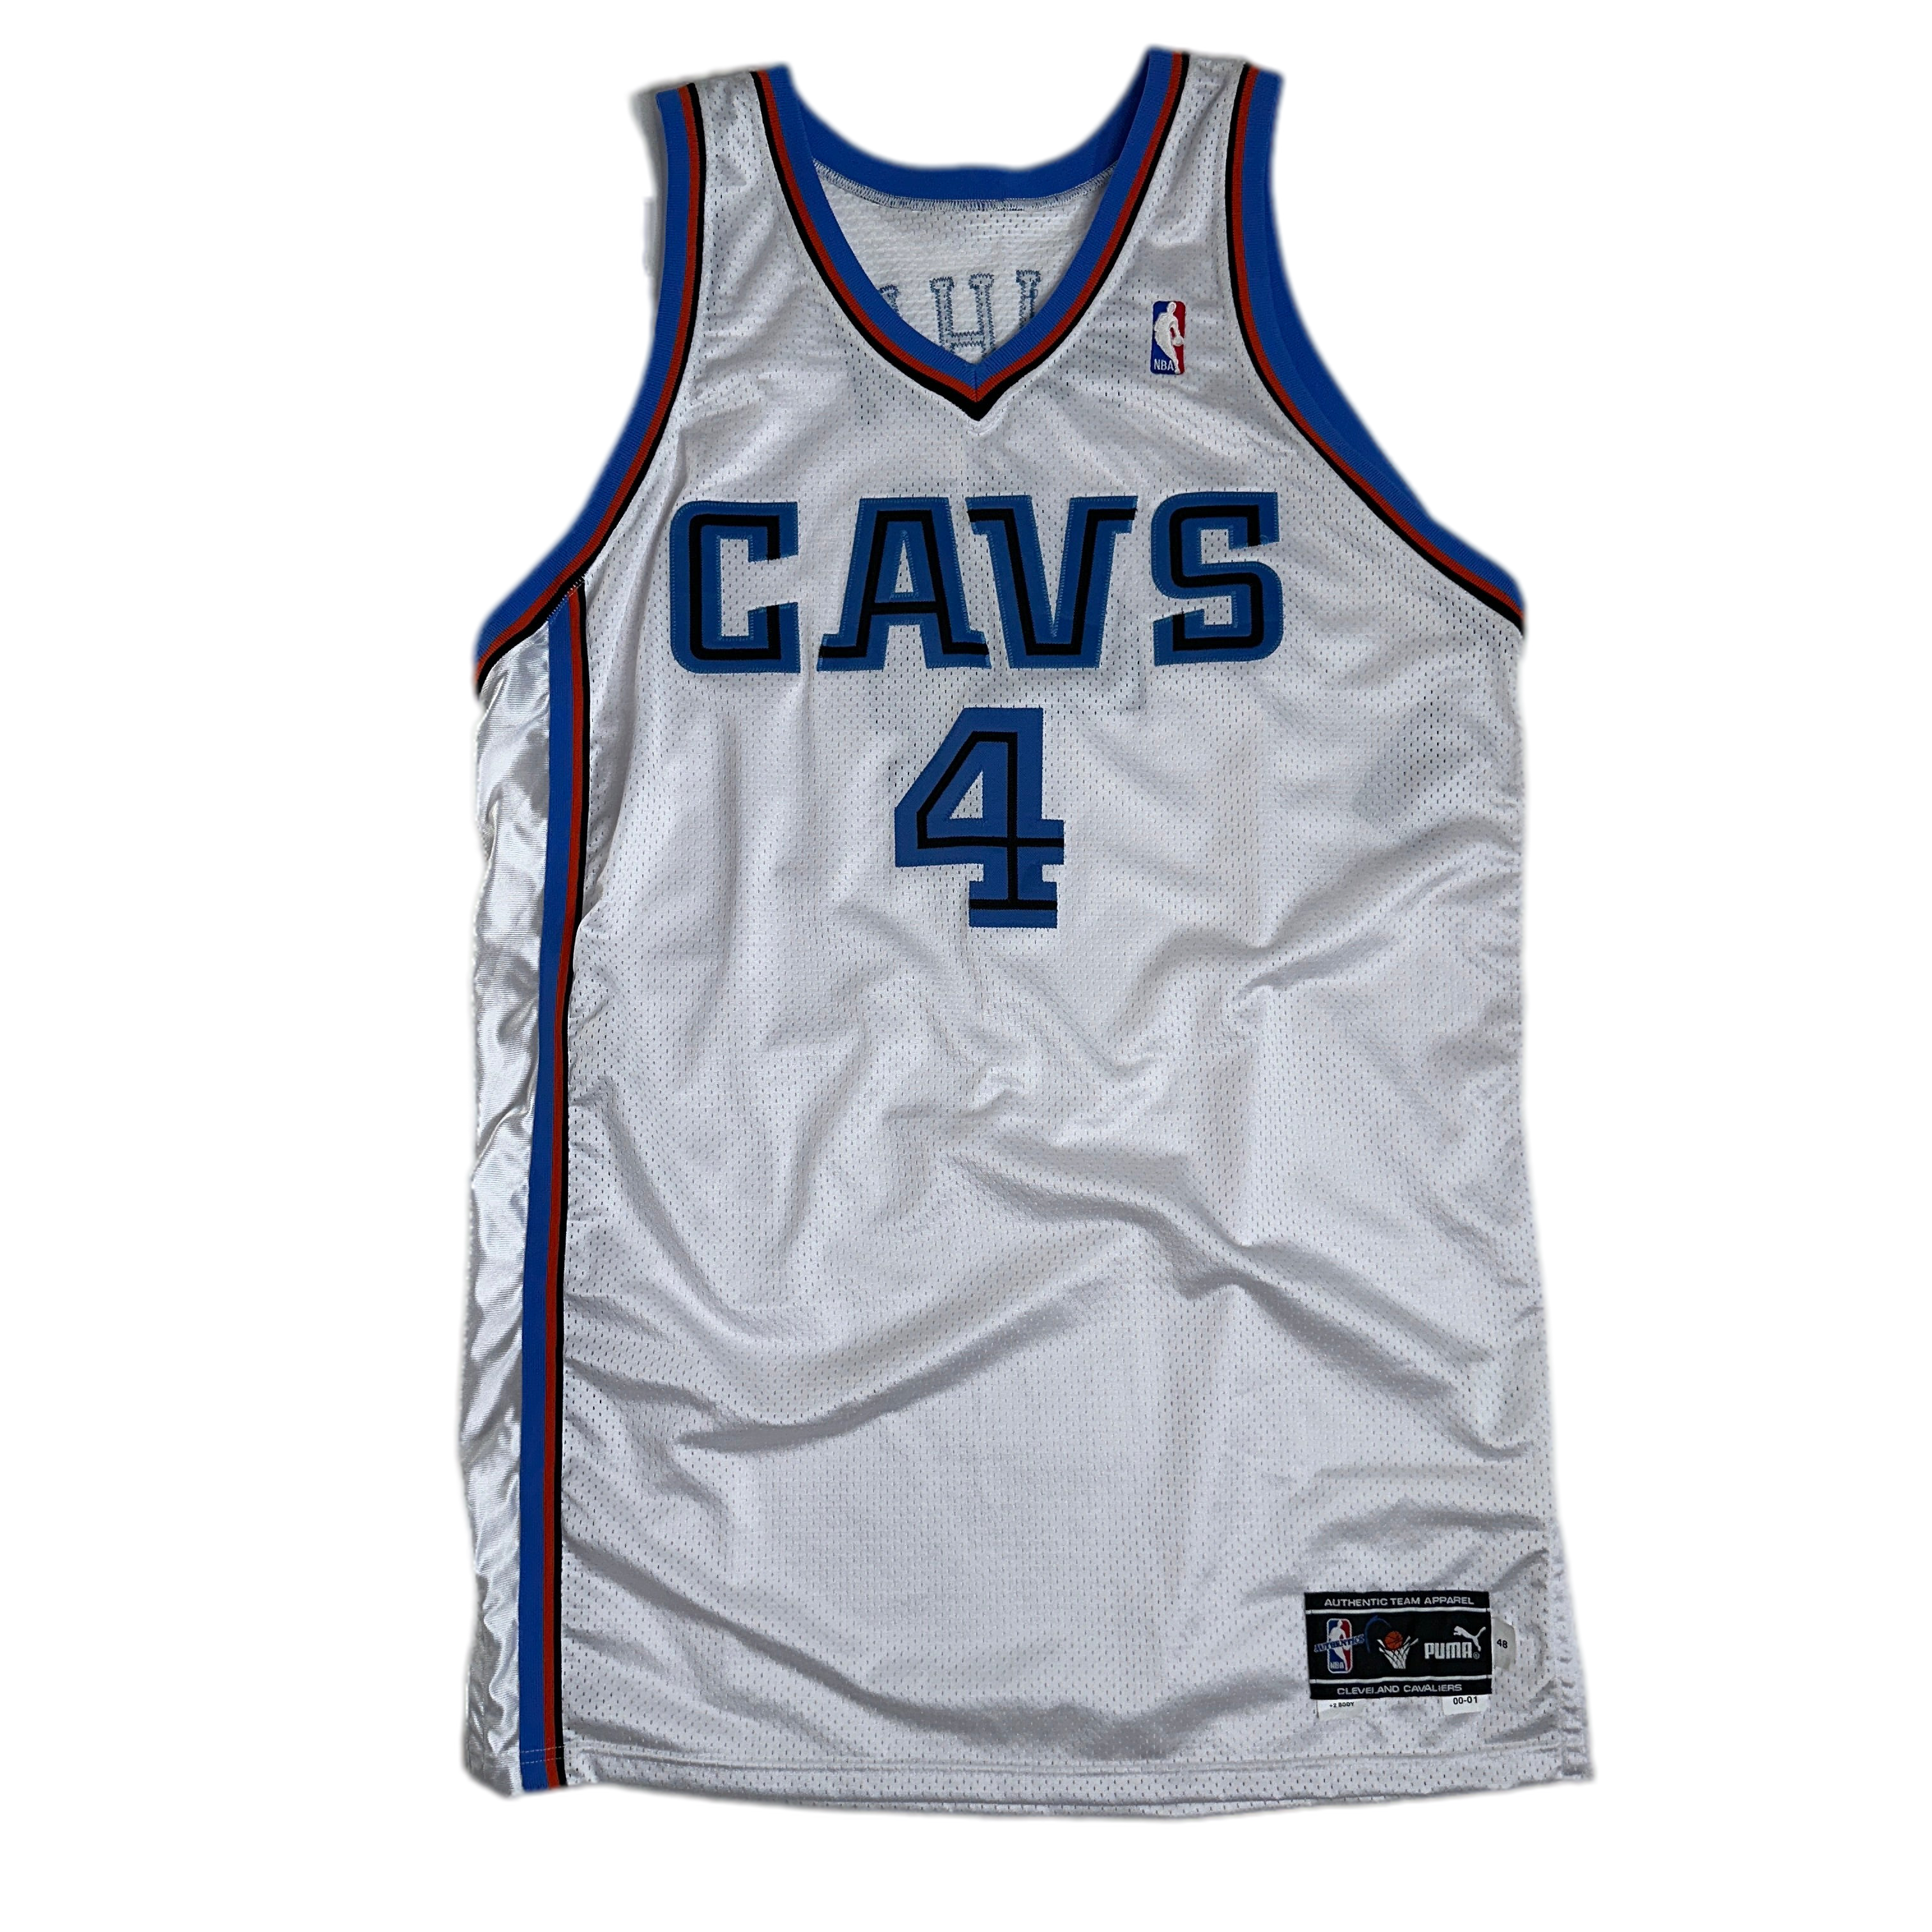 Cleveland Cavaliers Jerseys in Cleveland Cavaliers Team Shop 